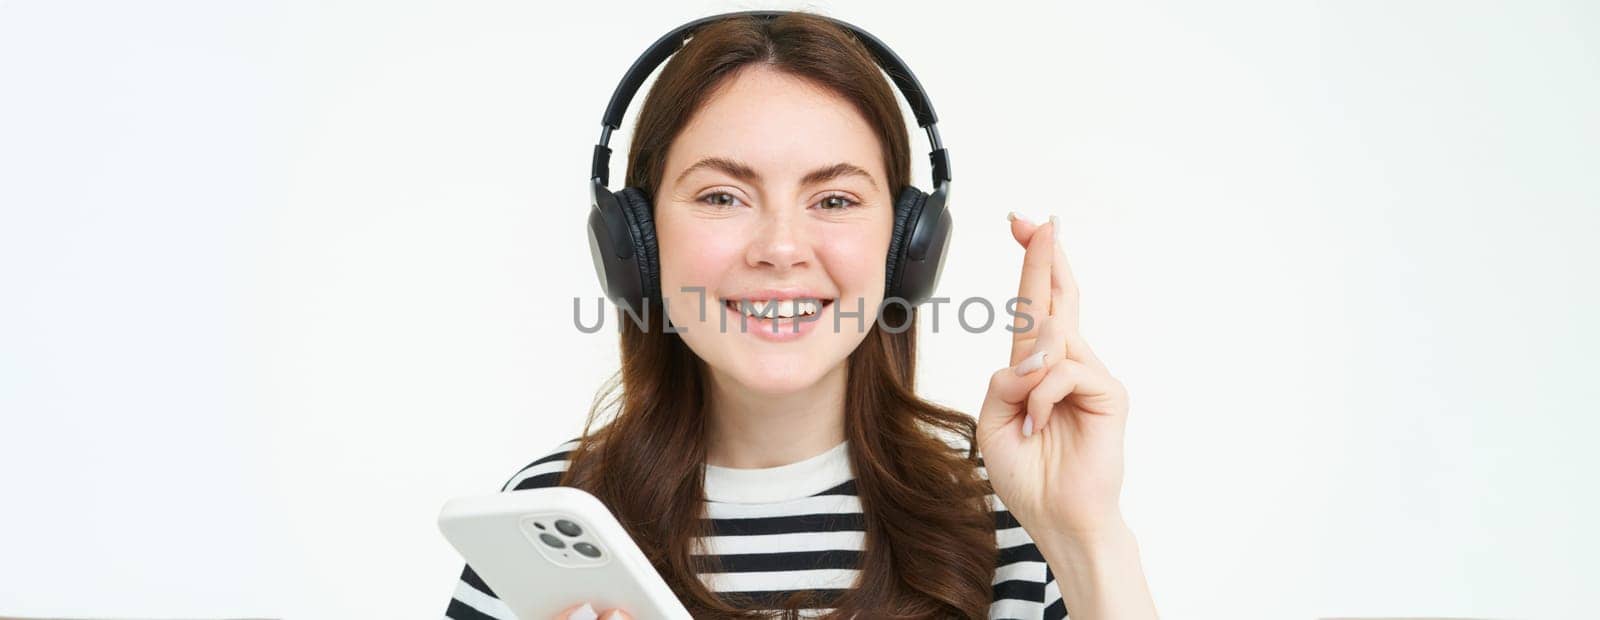 Portrait of smiling female model using headphones and smartphone, hold fingers crossed, makes wish, hopes for something, anticipates, stands over white background.